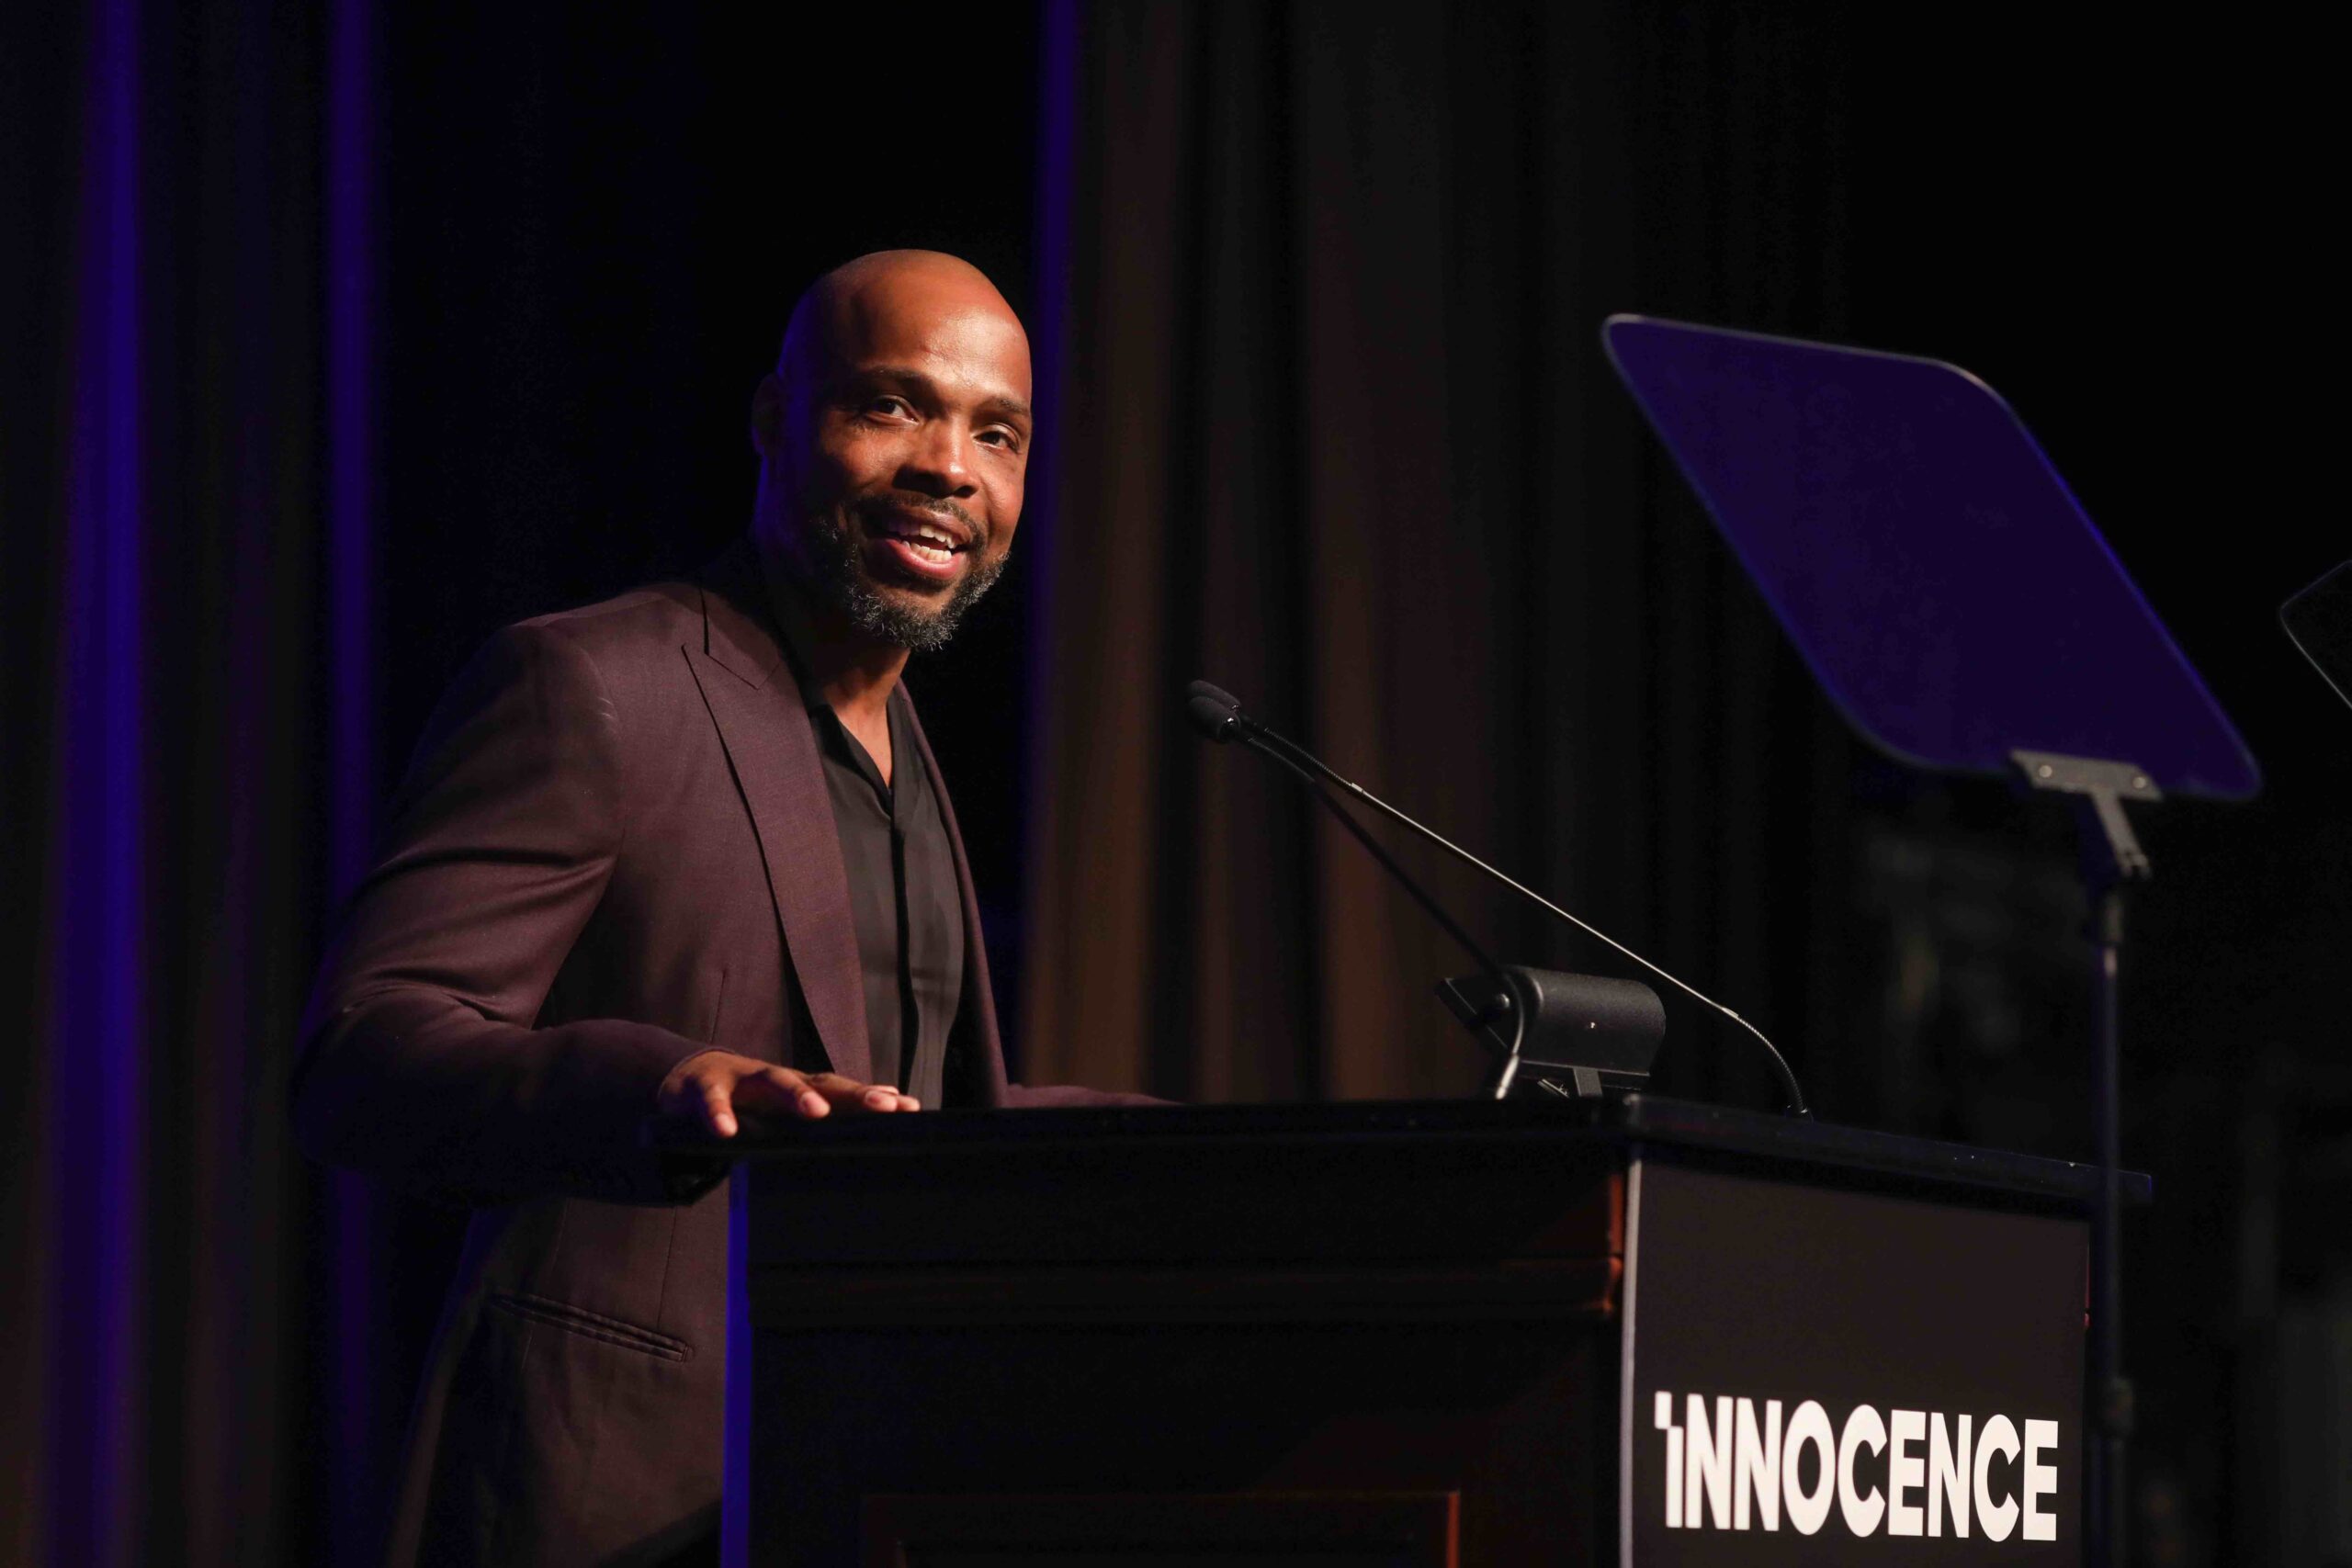 Exoneree Termaine Hicks at the Innocence Project's 30th Anniversary Gala: A Celebration of Freedom & Justice on May 4, 2022. (Image: Matthew Adams Photography/Innocence Project)